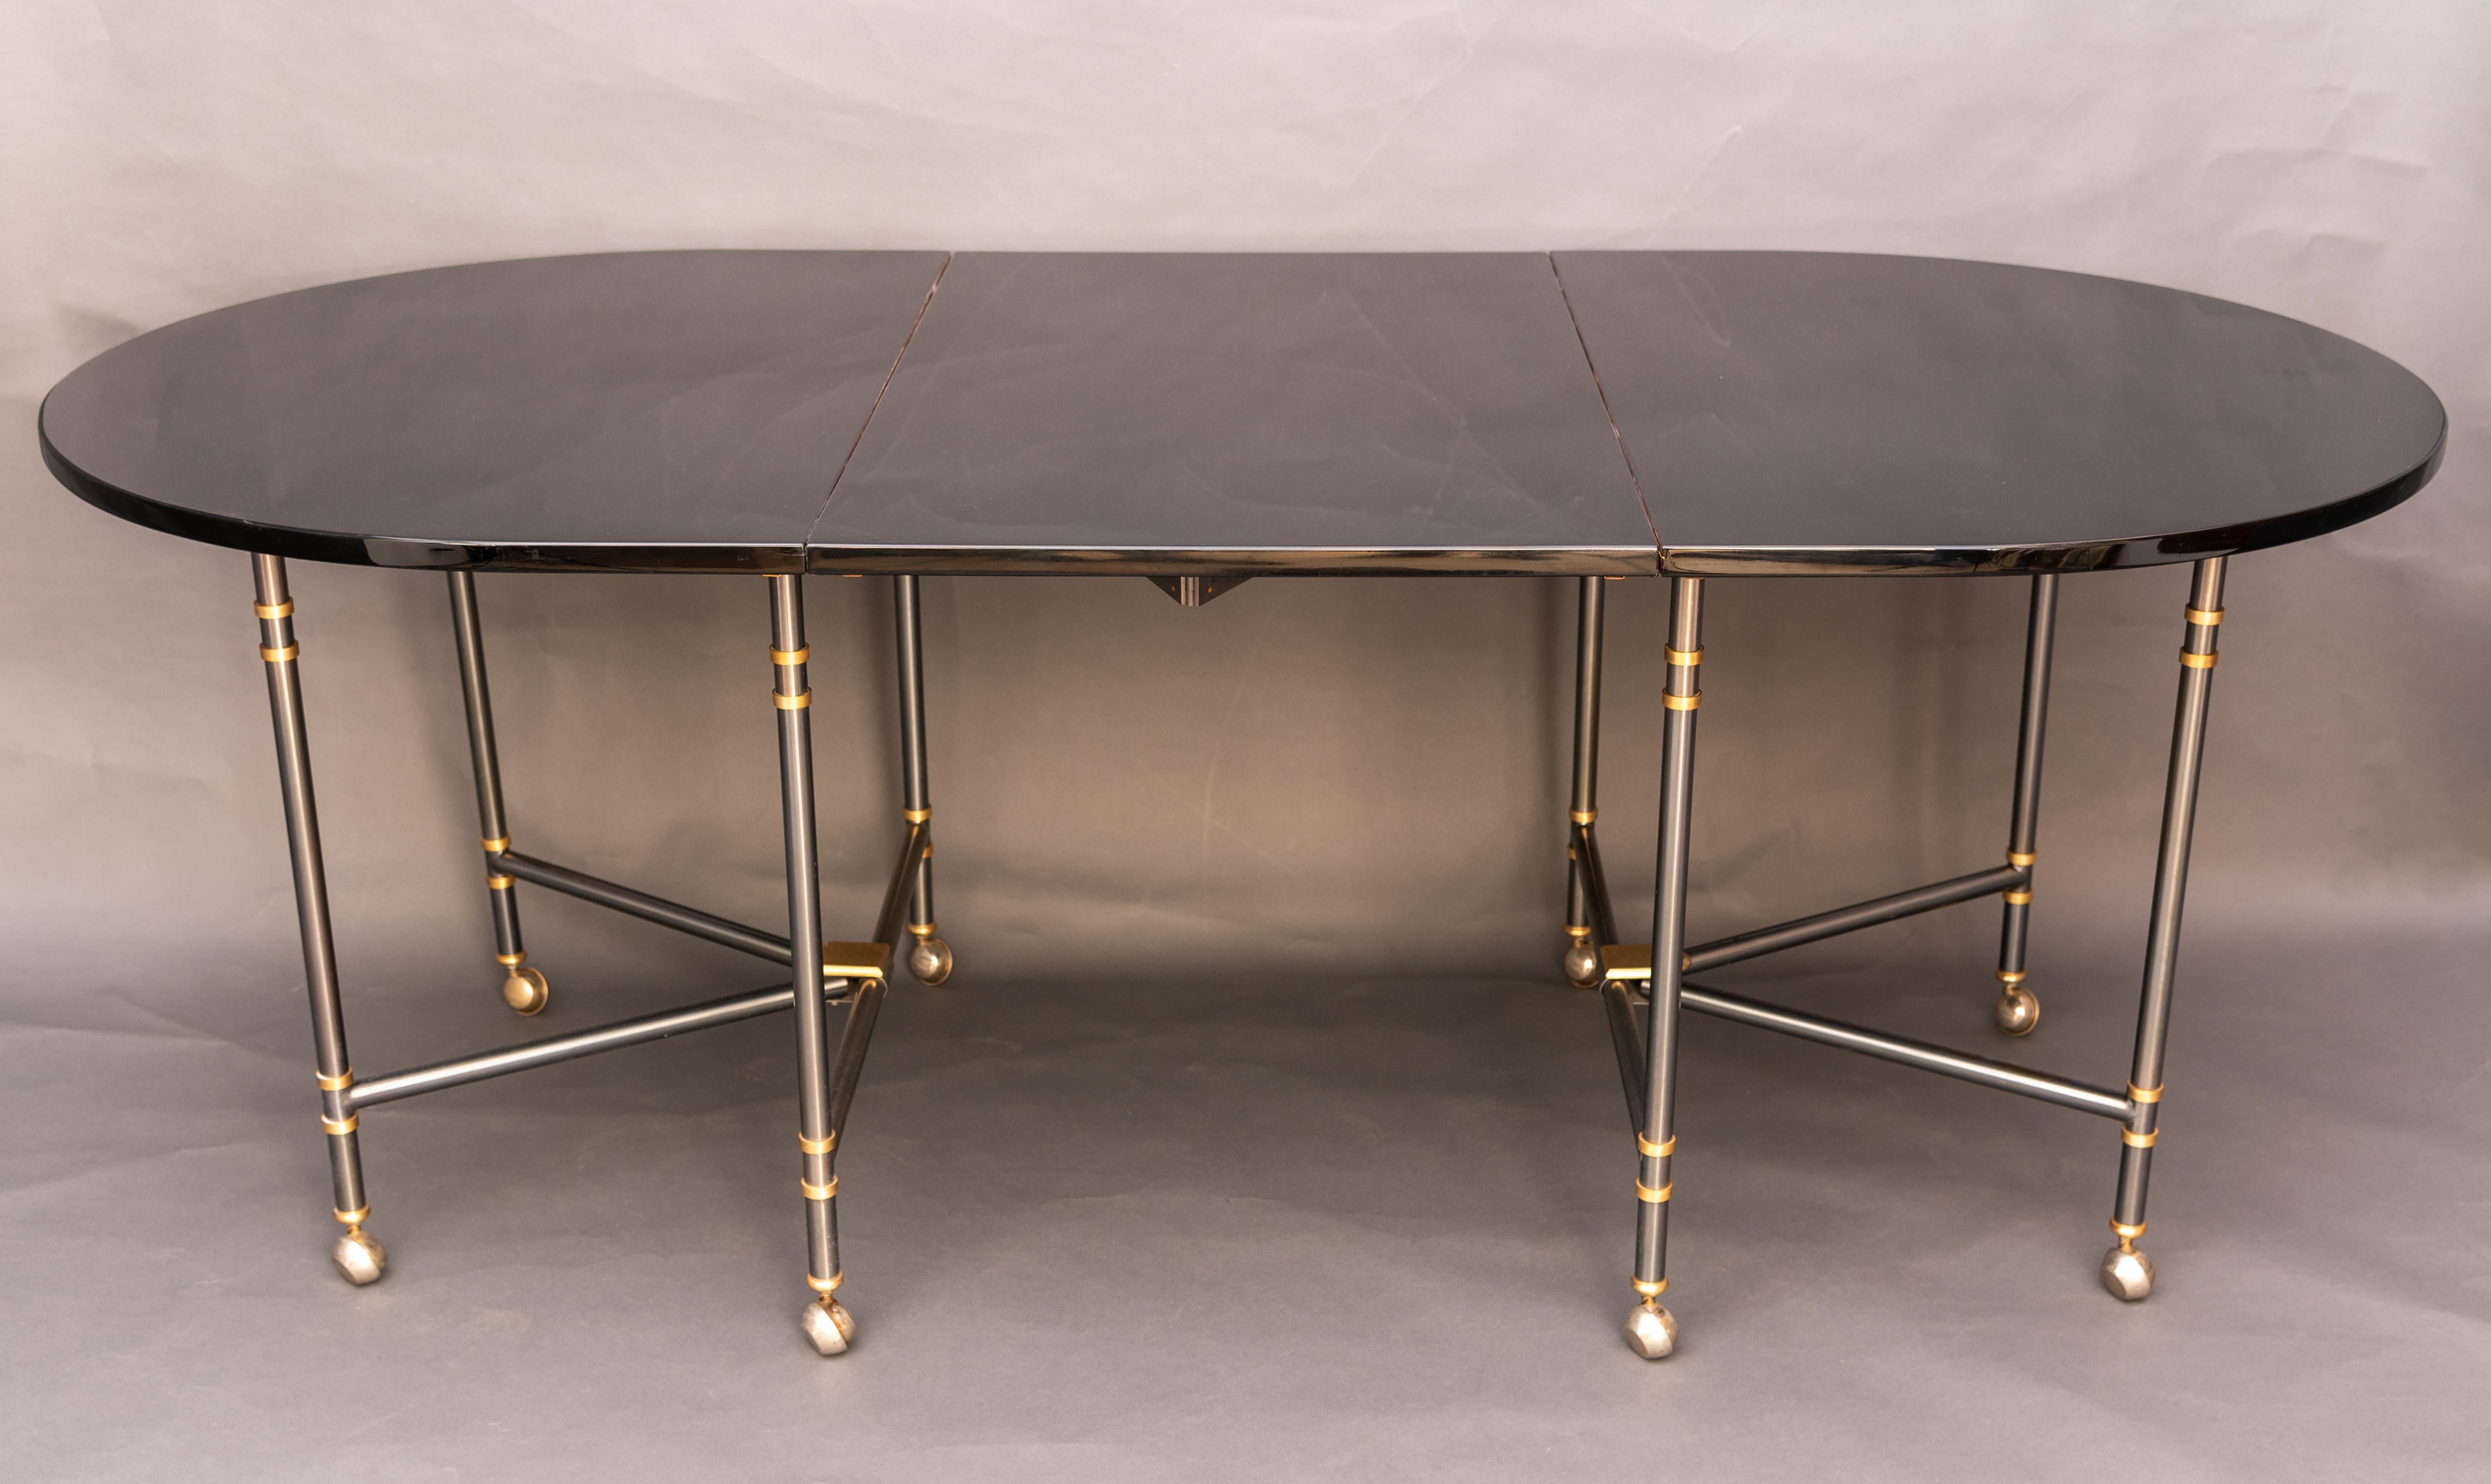 Maison Jansen Oval Black Lacquered France Dining Table Royal Model 8